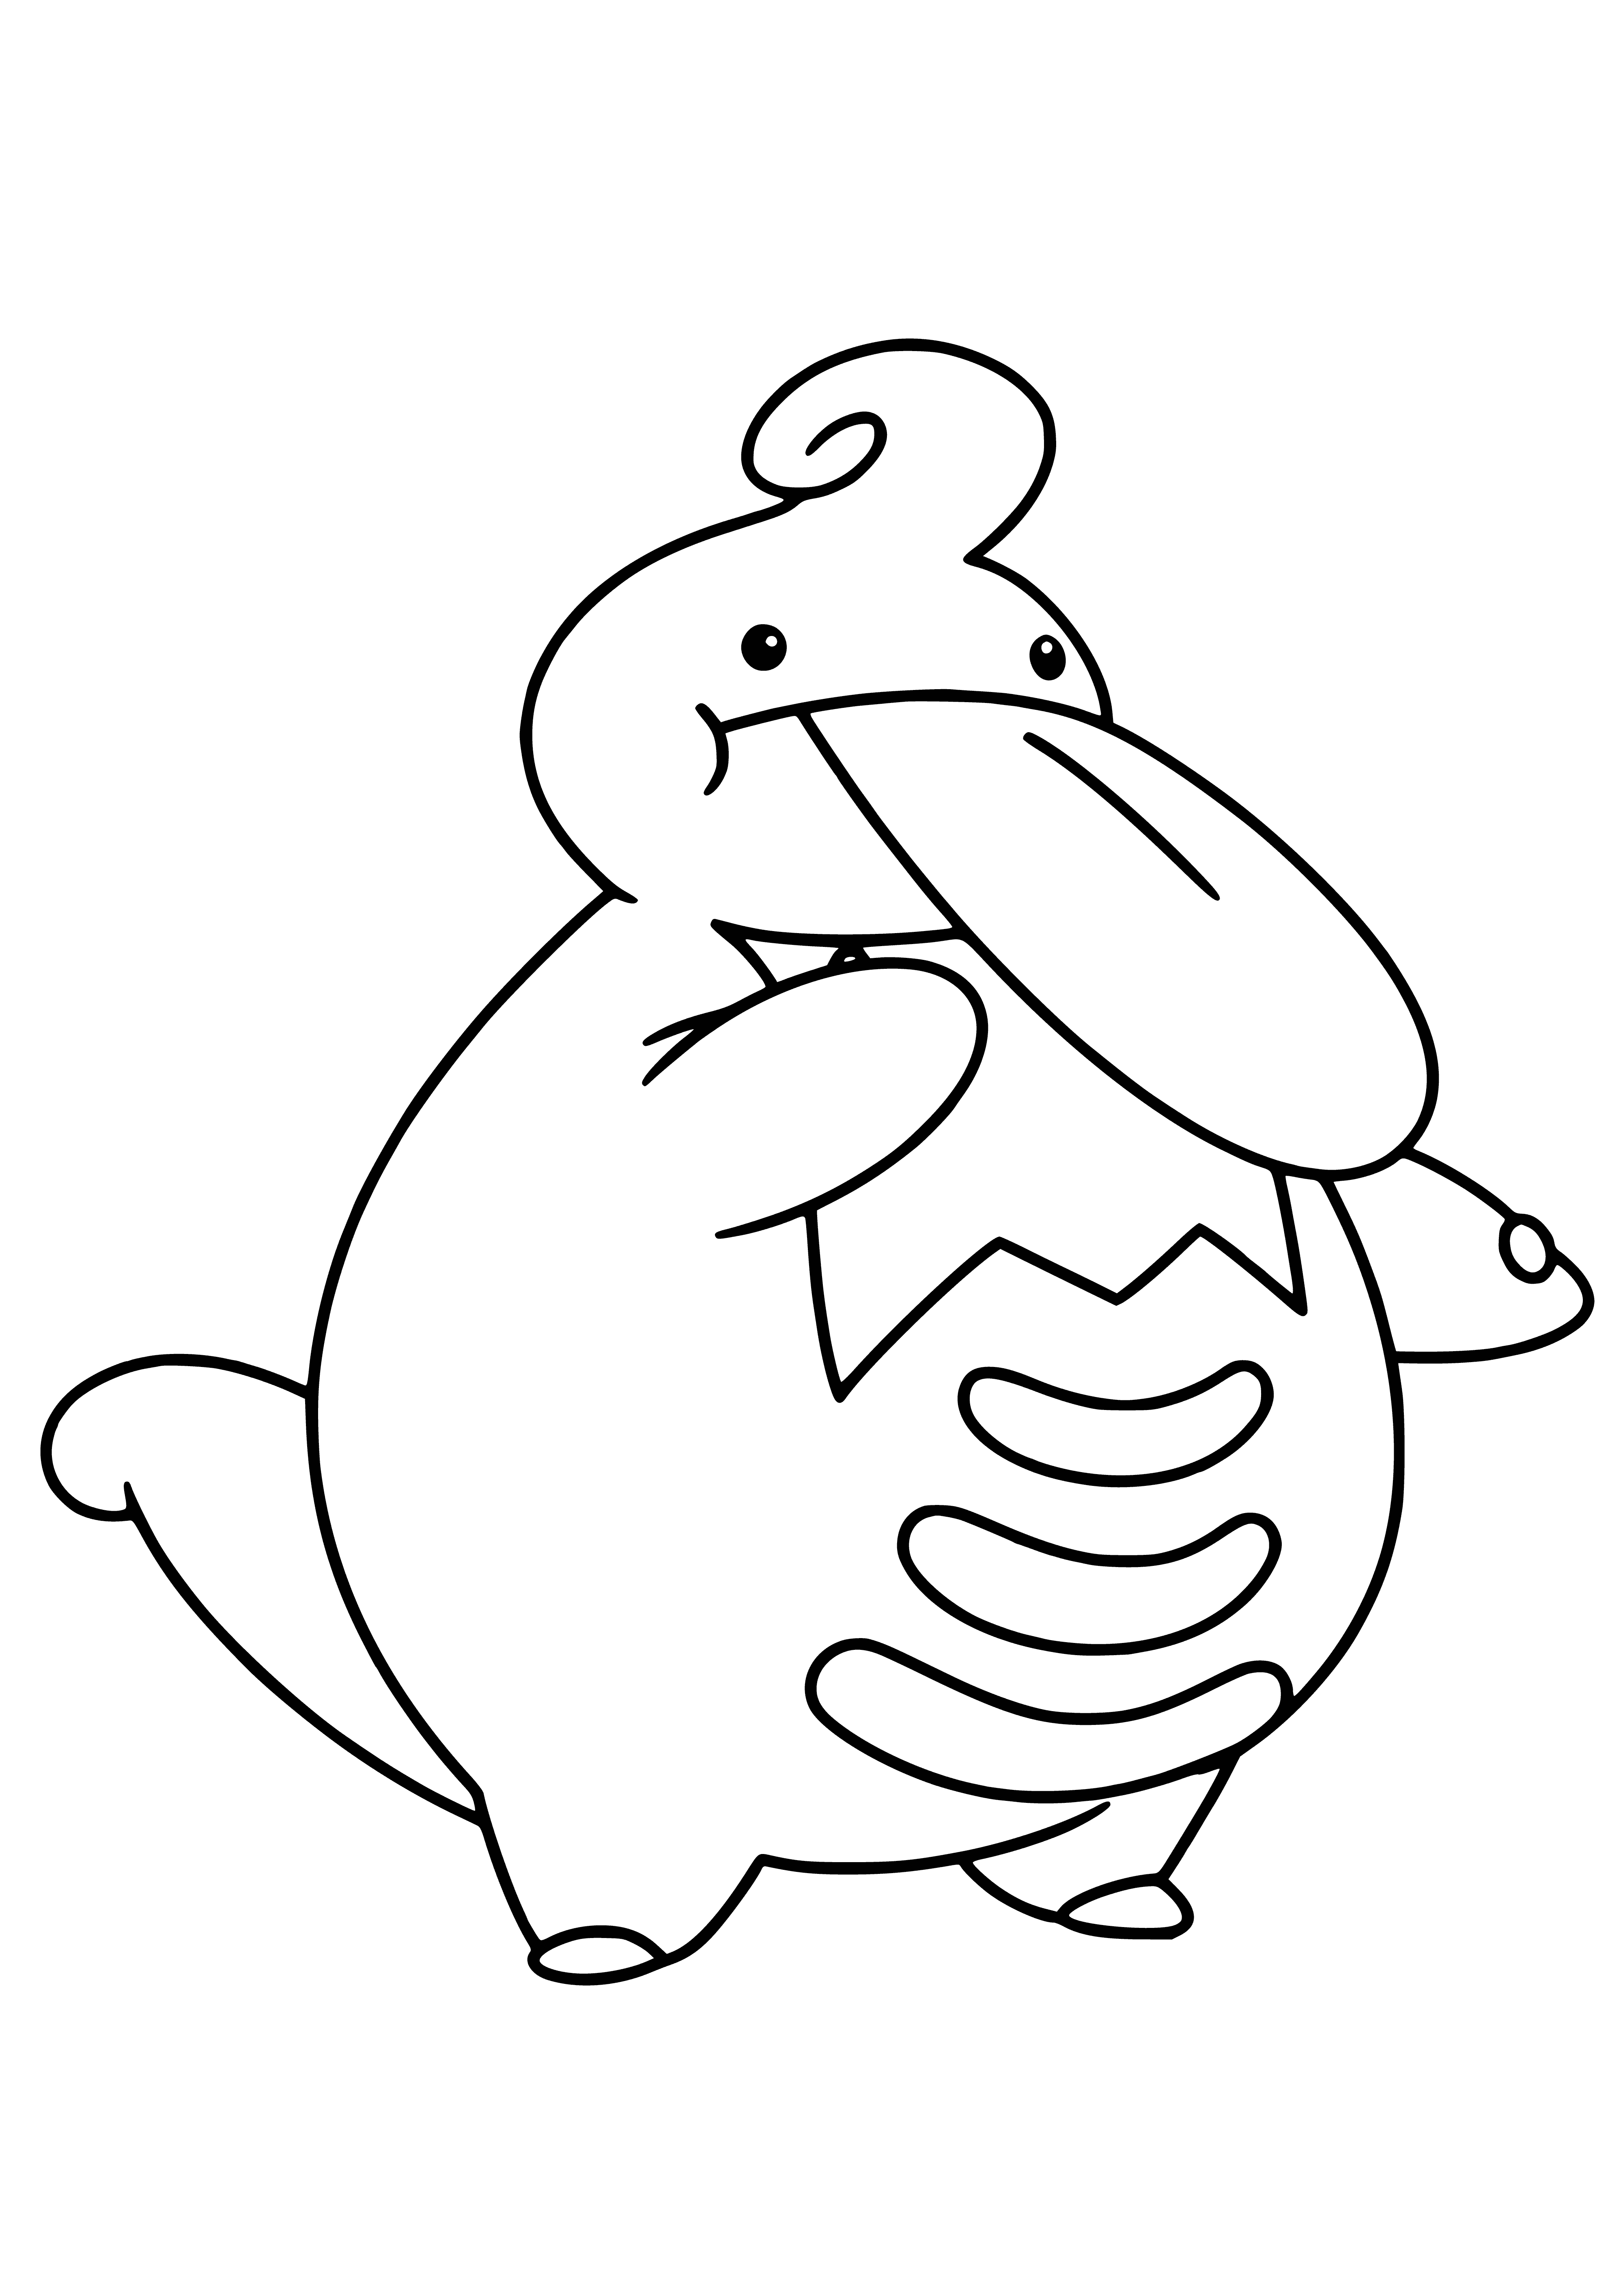 coloring page: Pokémon Lickilicky is a pink, rounded giant with five tongues and a yellow spiral; it evolved from Lickitung.